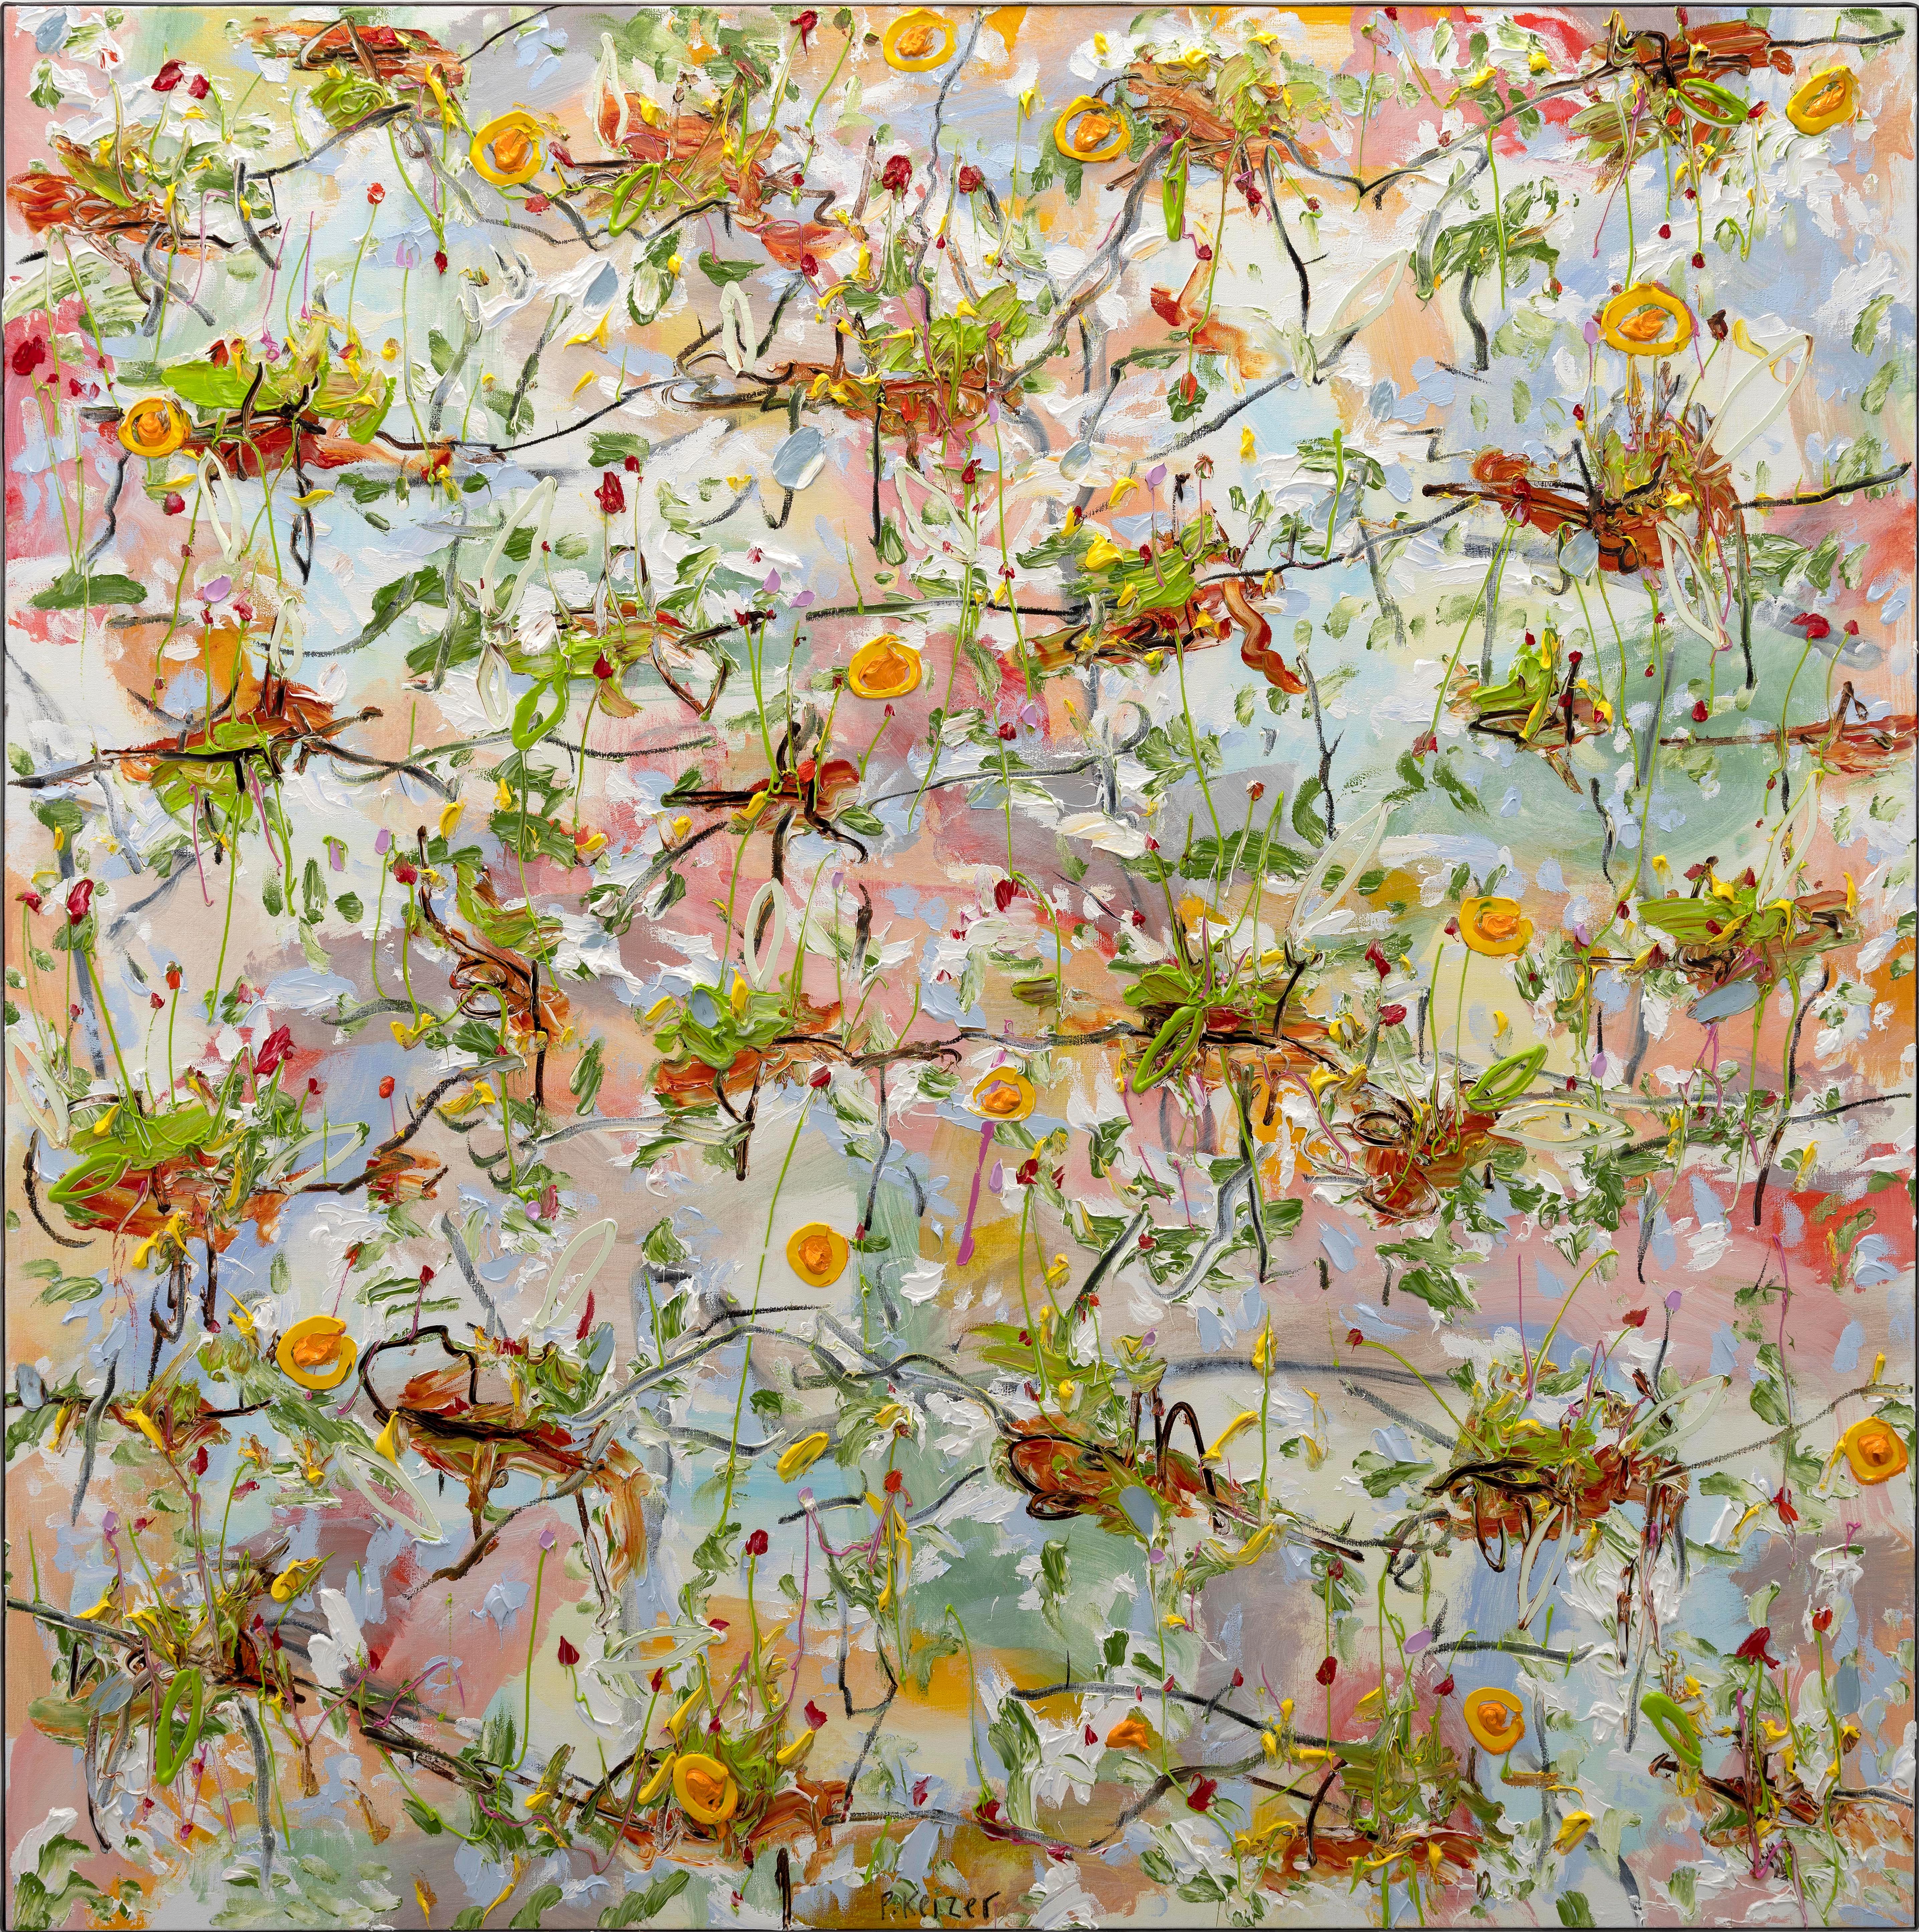 "Change of season" oil painting on canvas - Peter Keizer - Flowers, Nature